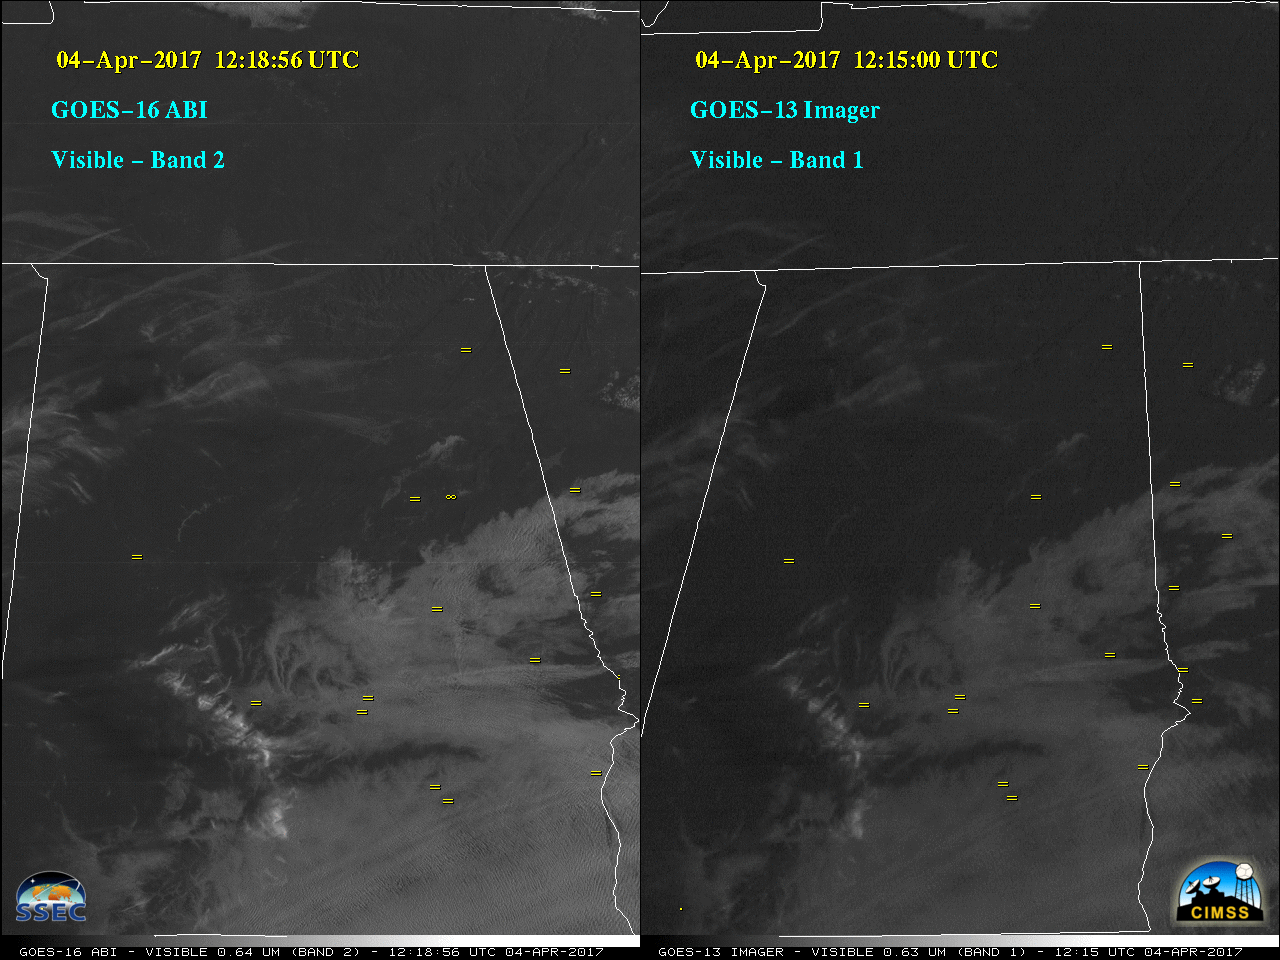 GOES-16 0.64 µm Visible (left) and GOES-13 0.63 µm Visible (right) images, with surface reports of fog plotted in yellow [click to play animation] 